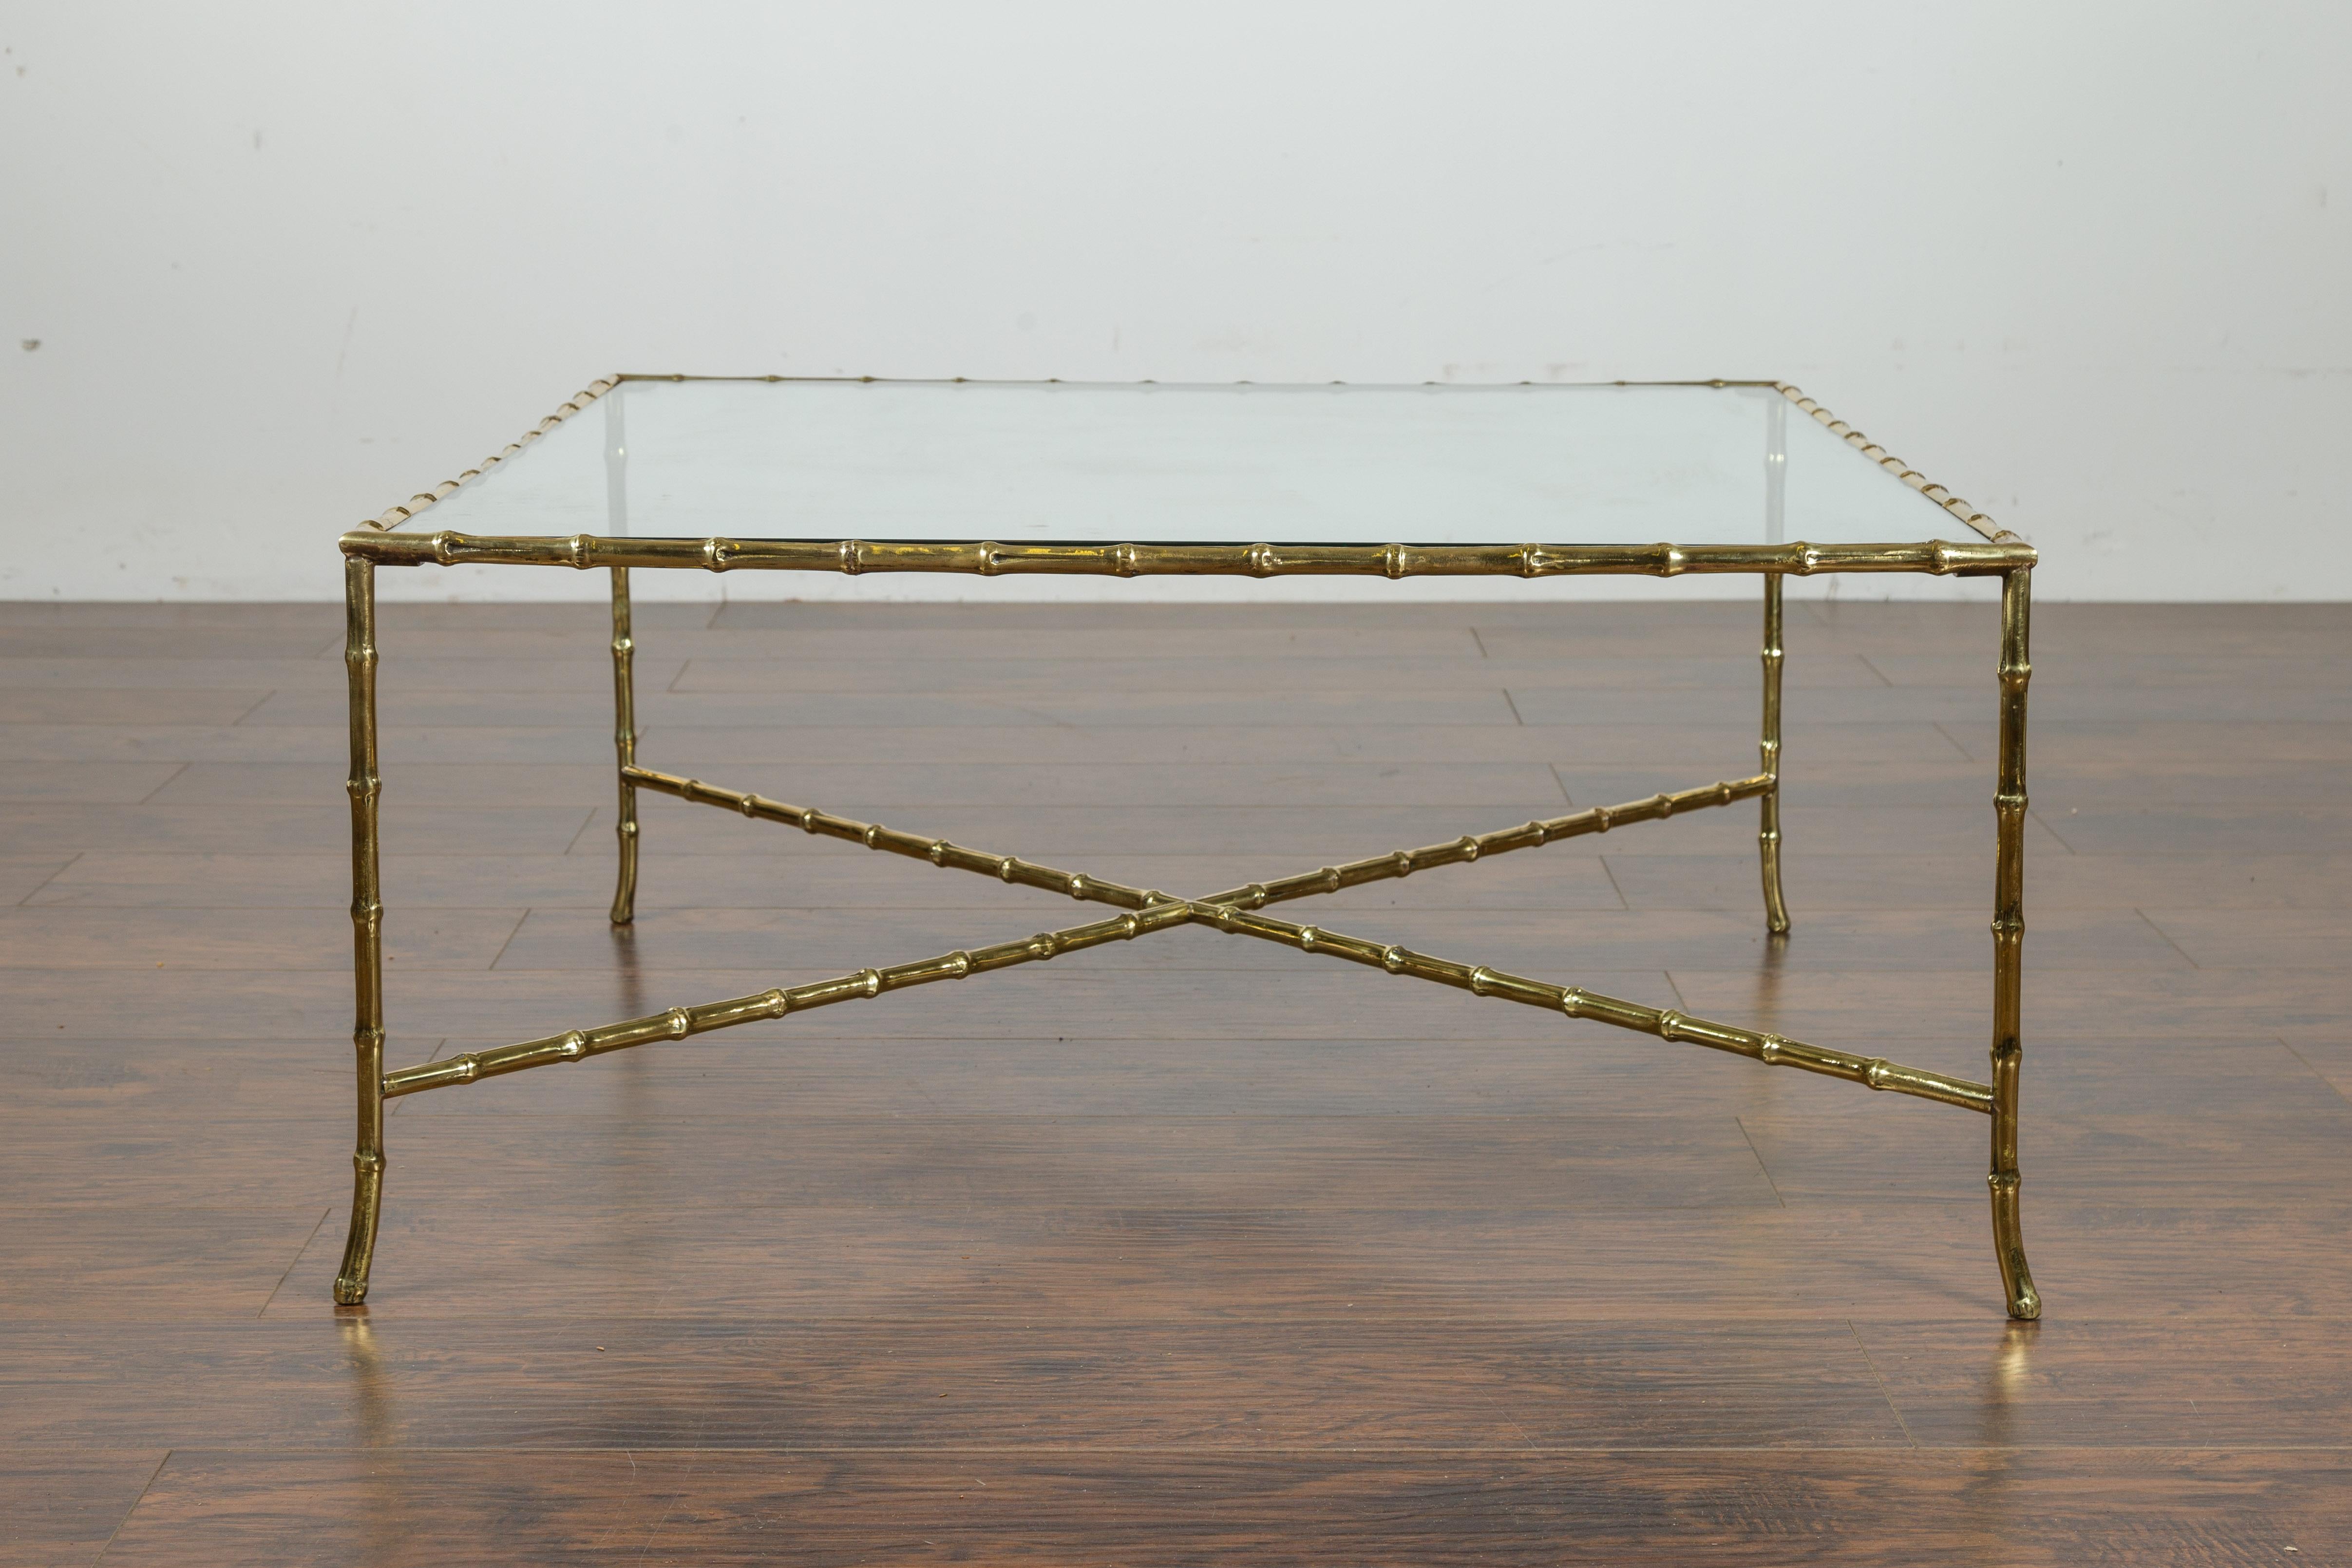 An Italian vintage brass coffee table from the mid-20th century, with glass top and faux bamboo base. Created in Italy during the midcentury period, this brass coffee table features a rectangular glass top sitting above an eye-catching faux-bamboo